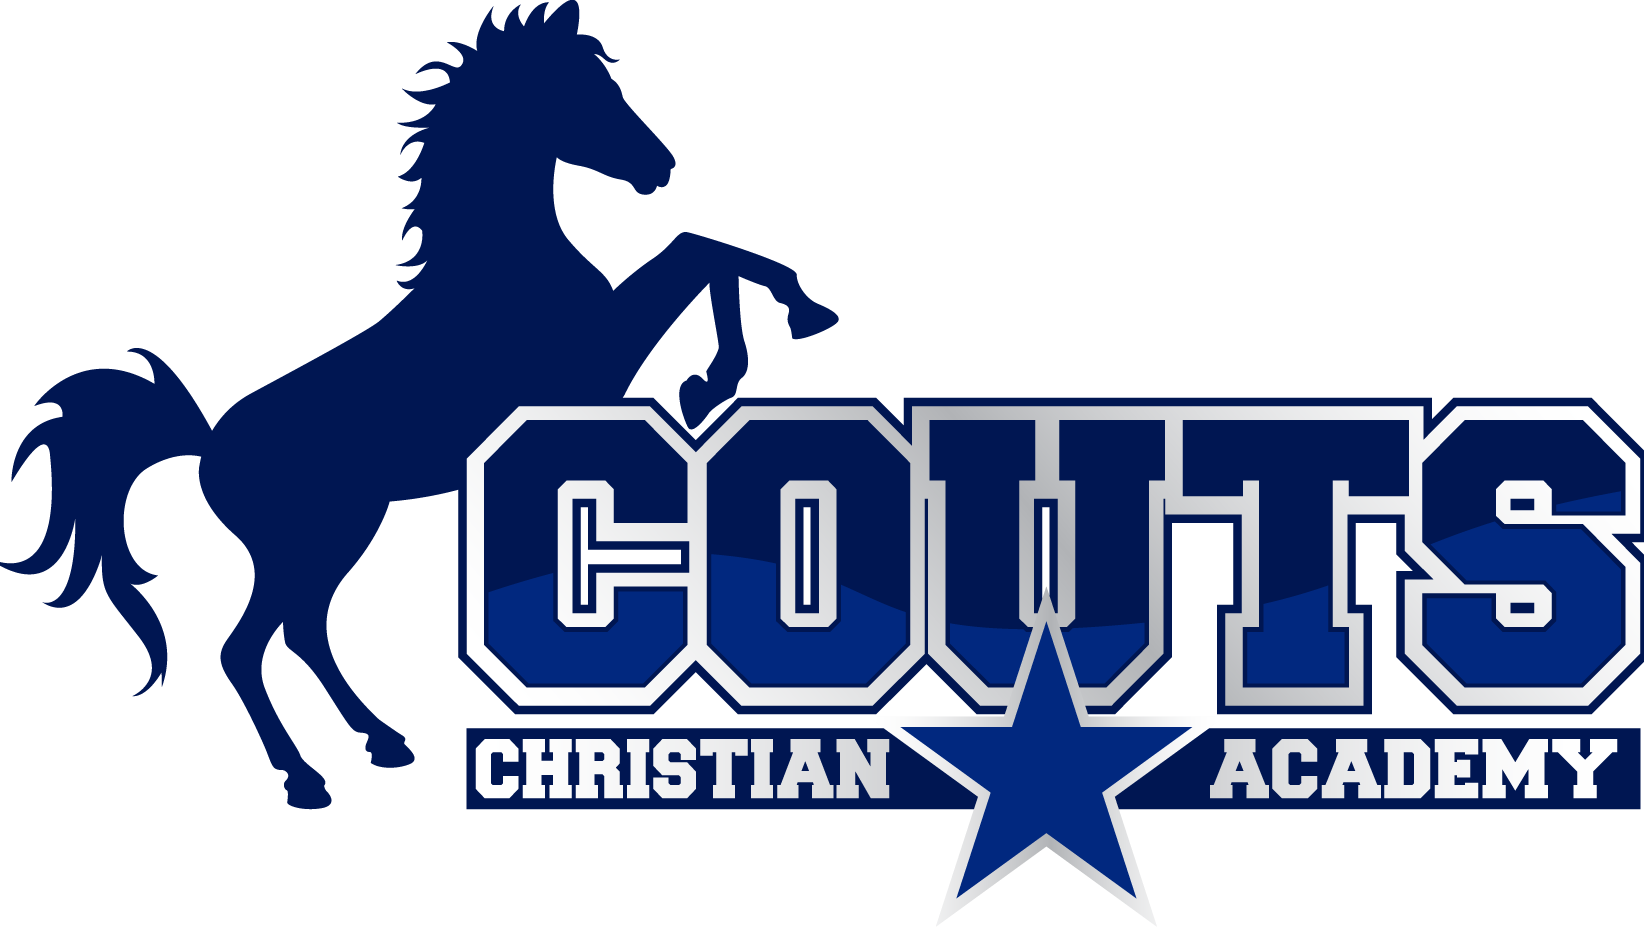 Couts Christian Academy